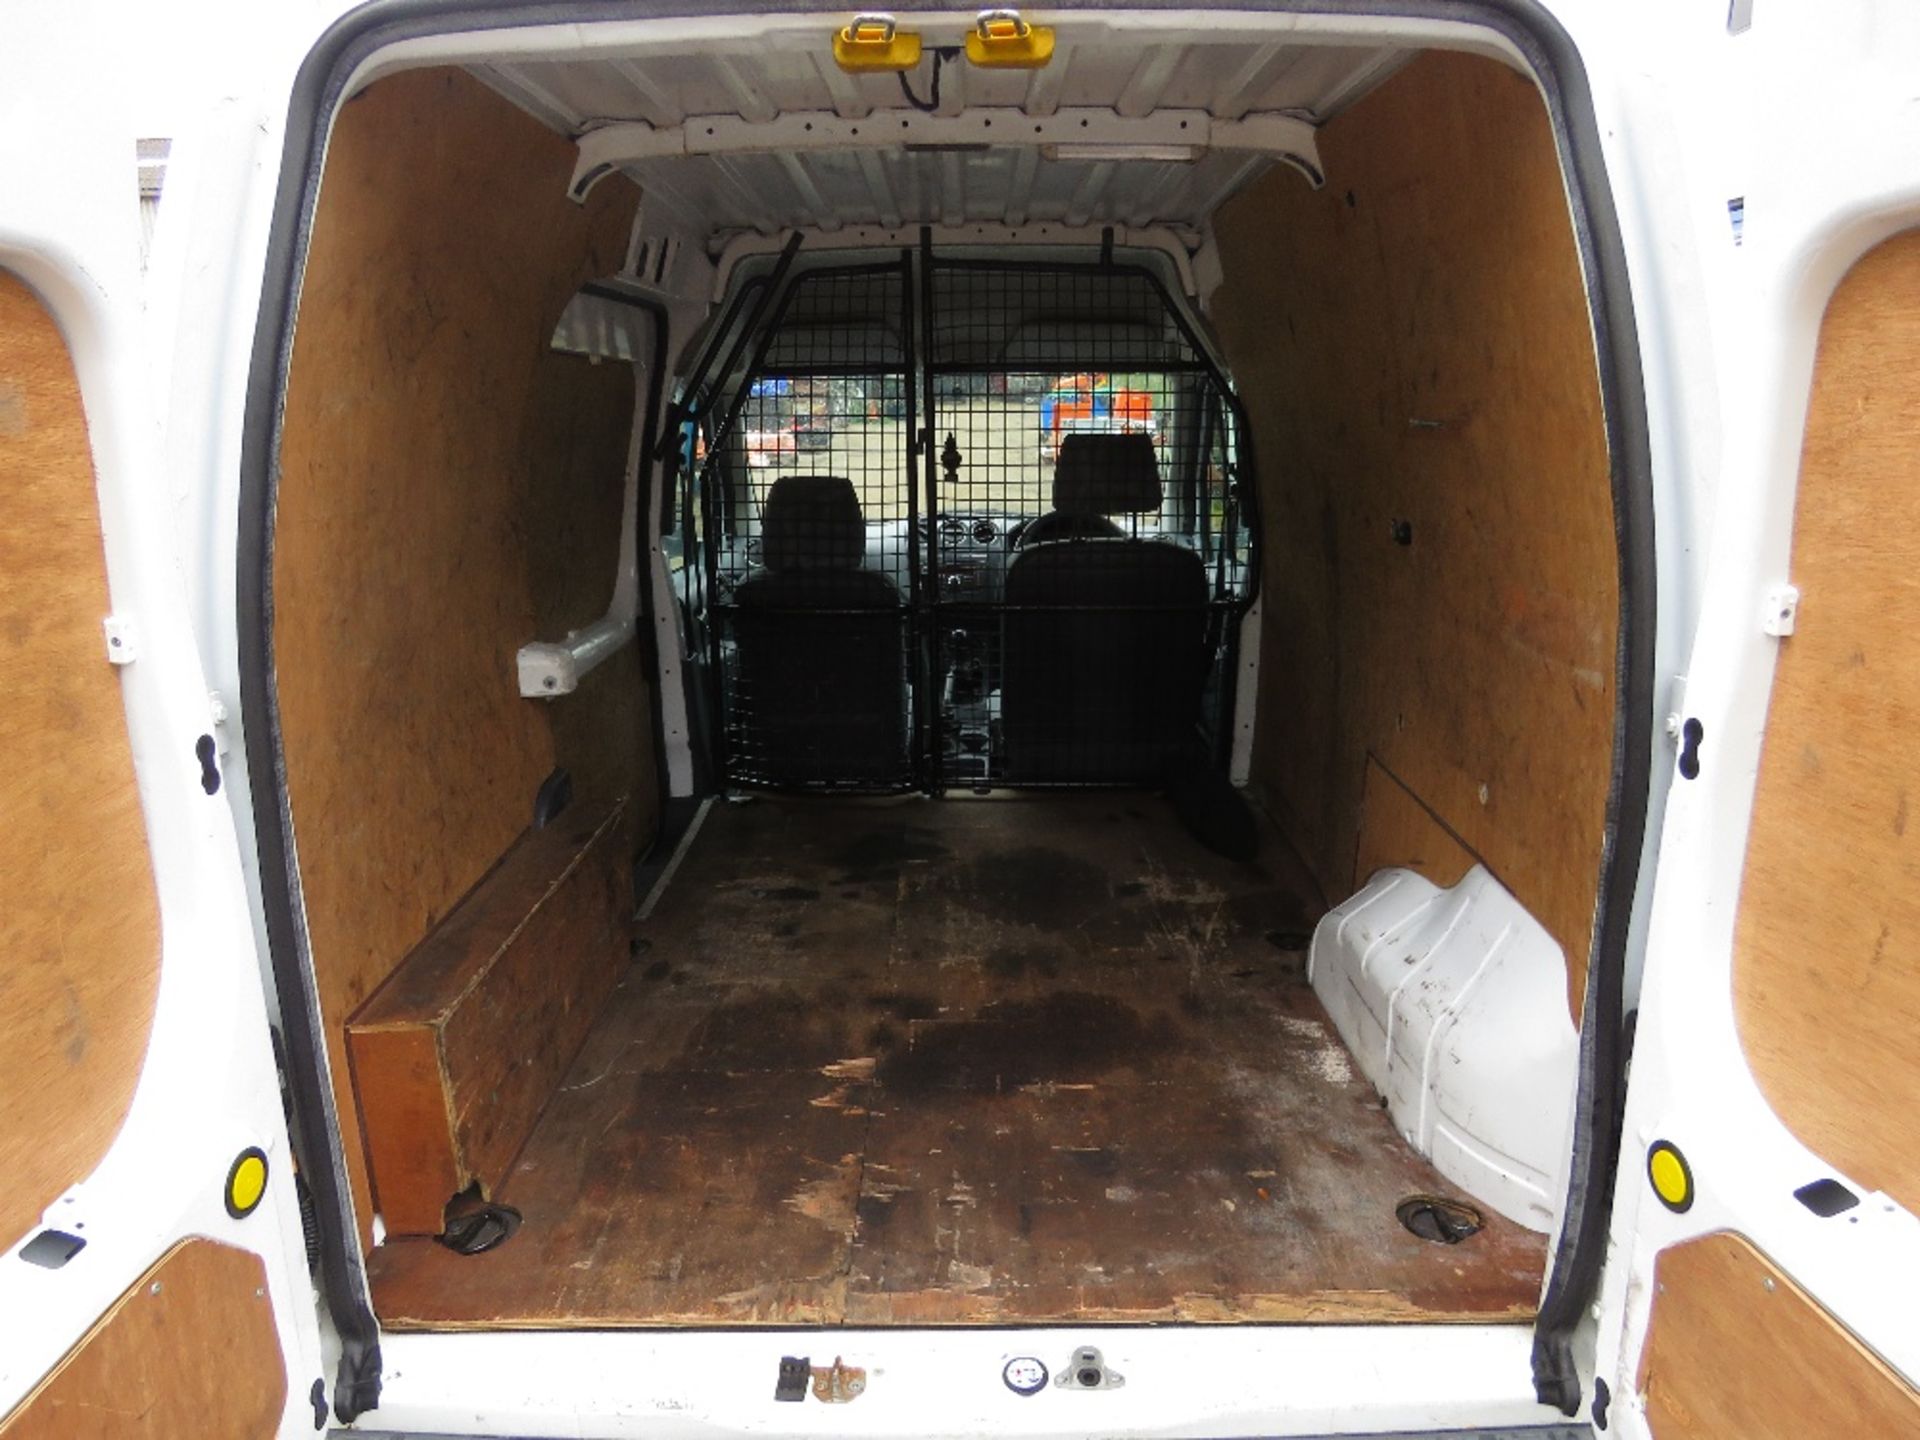 FORD TRANSIT CONNECT PANEL VAN REG:BV13 NKS 1.8LITRE. HIGH ROOF LWB. 83K REC MILES APPROX. WITH V5 A - Image 19 of 26